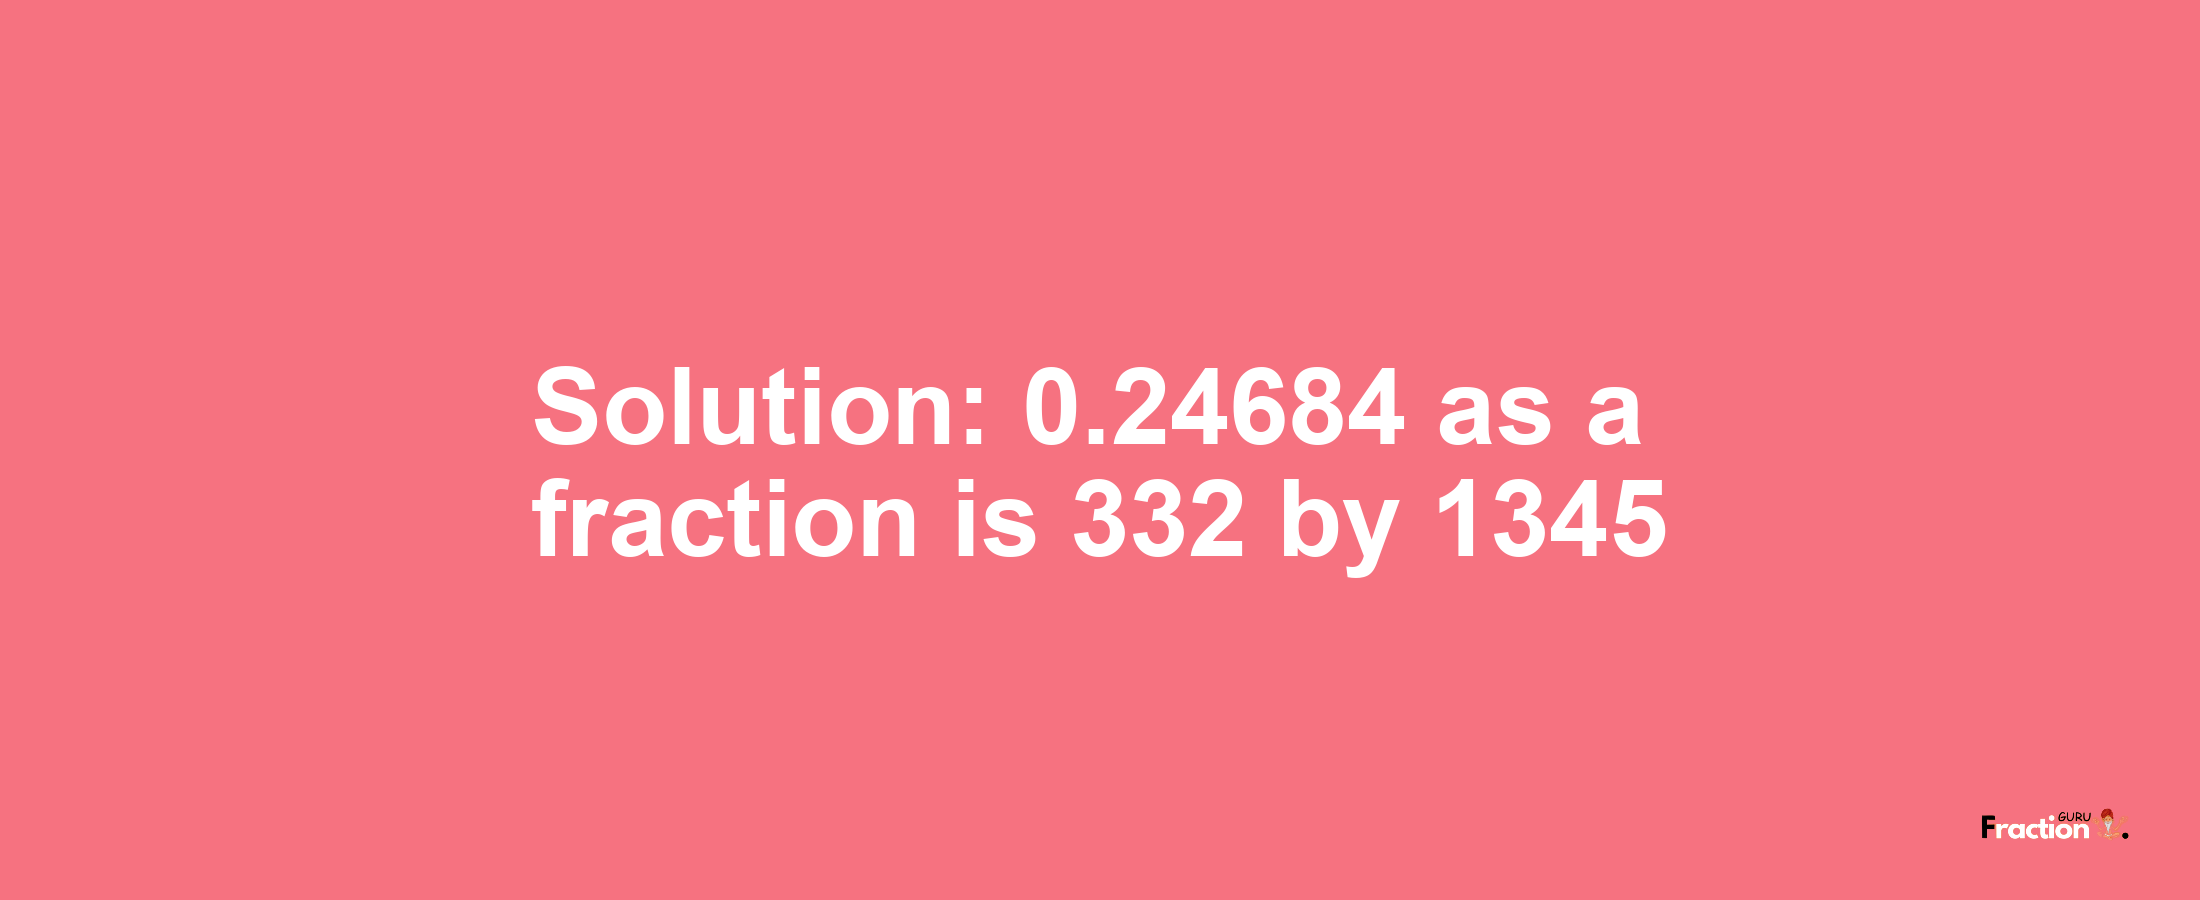 Solution:0.24684 as a fraction is 332/1345